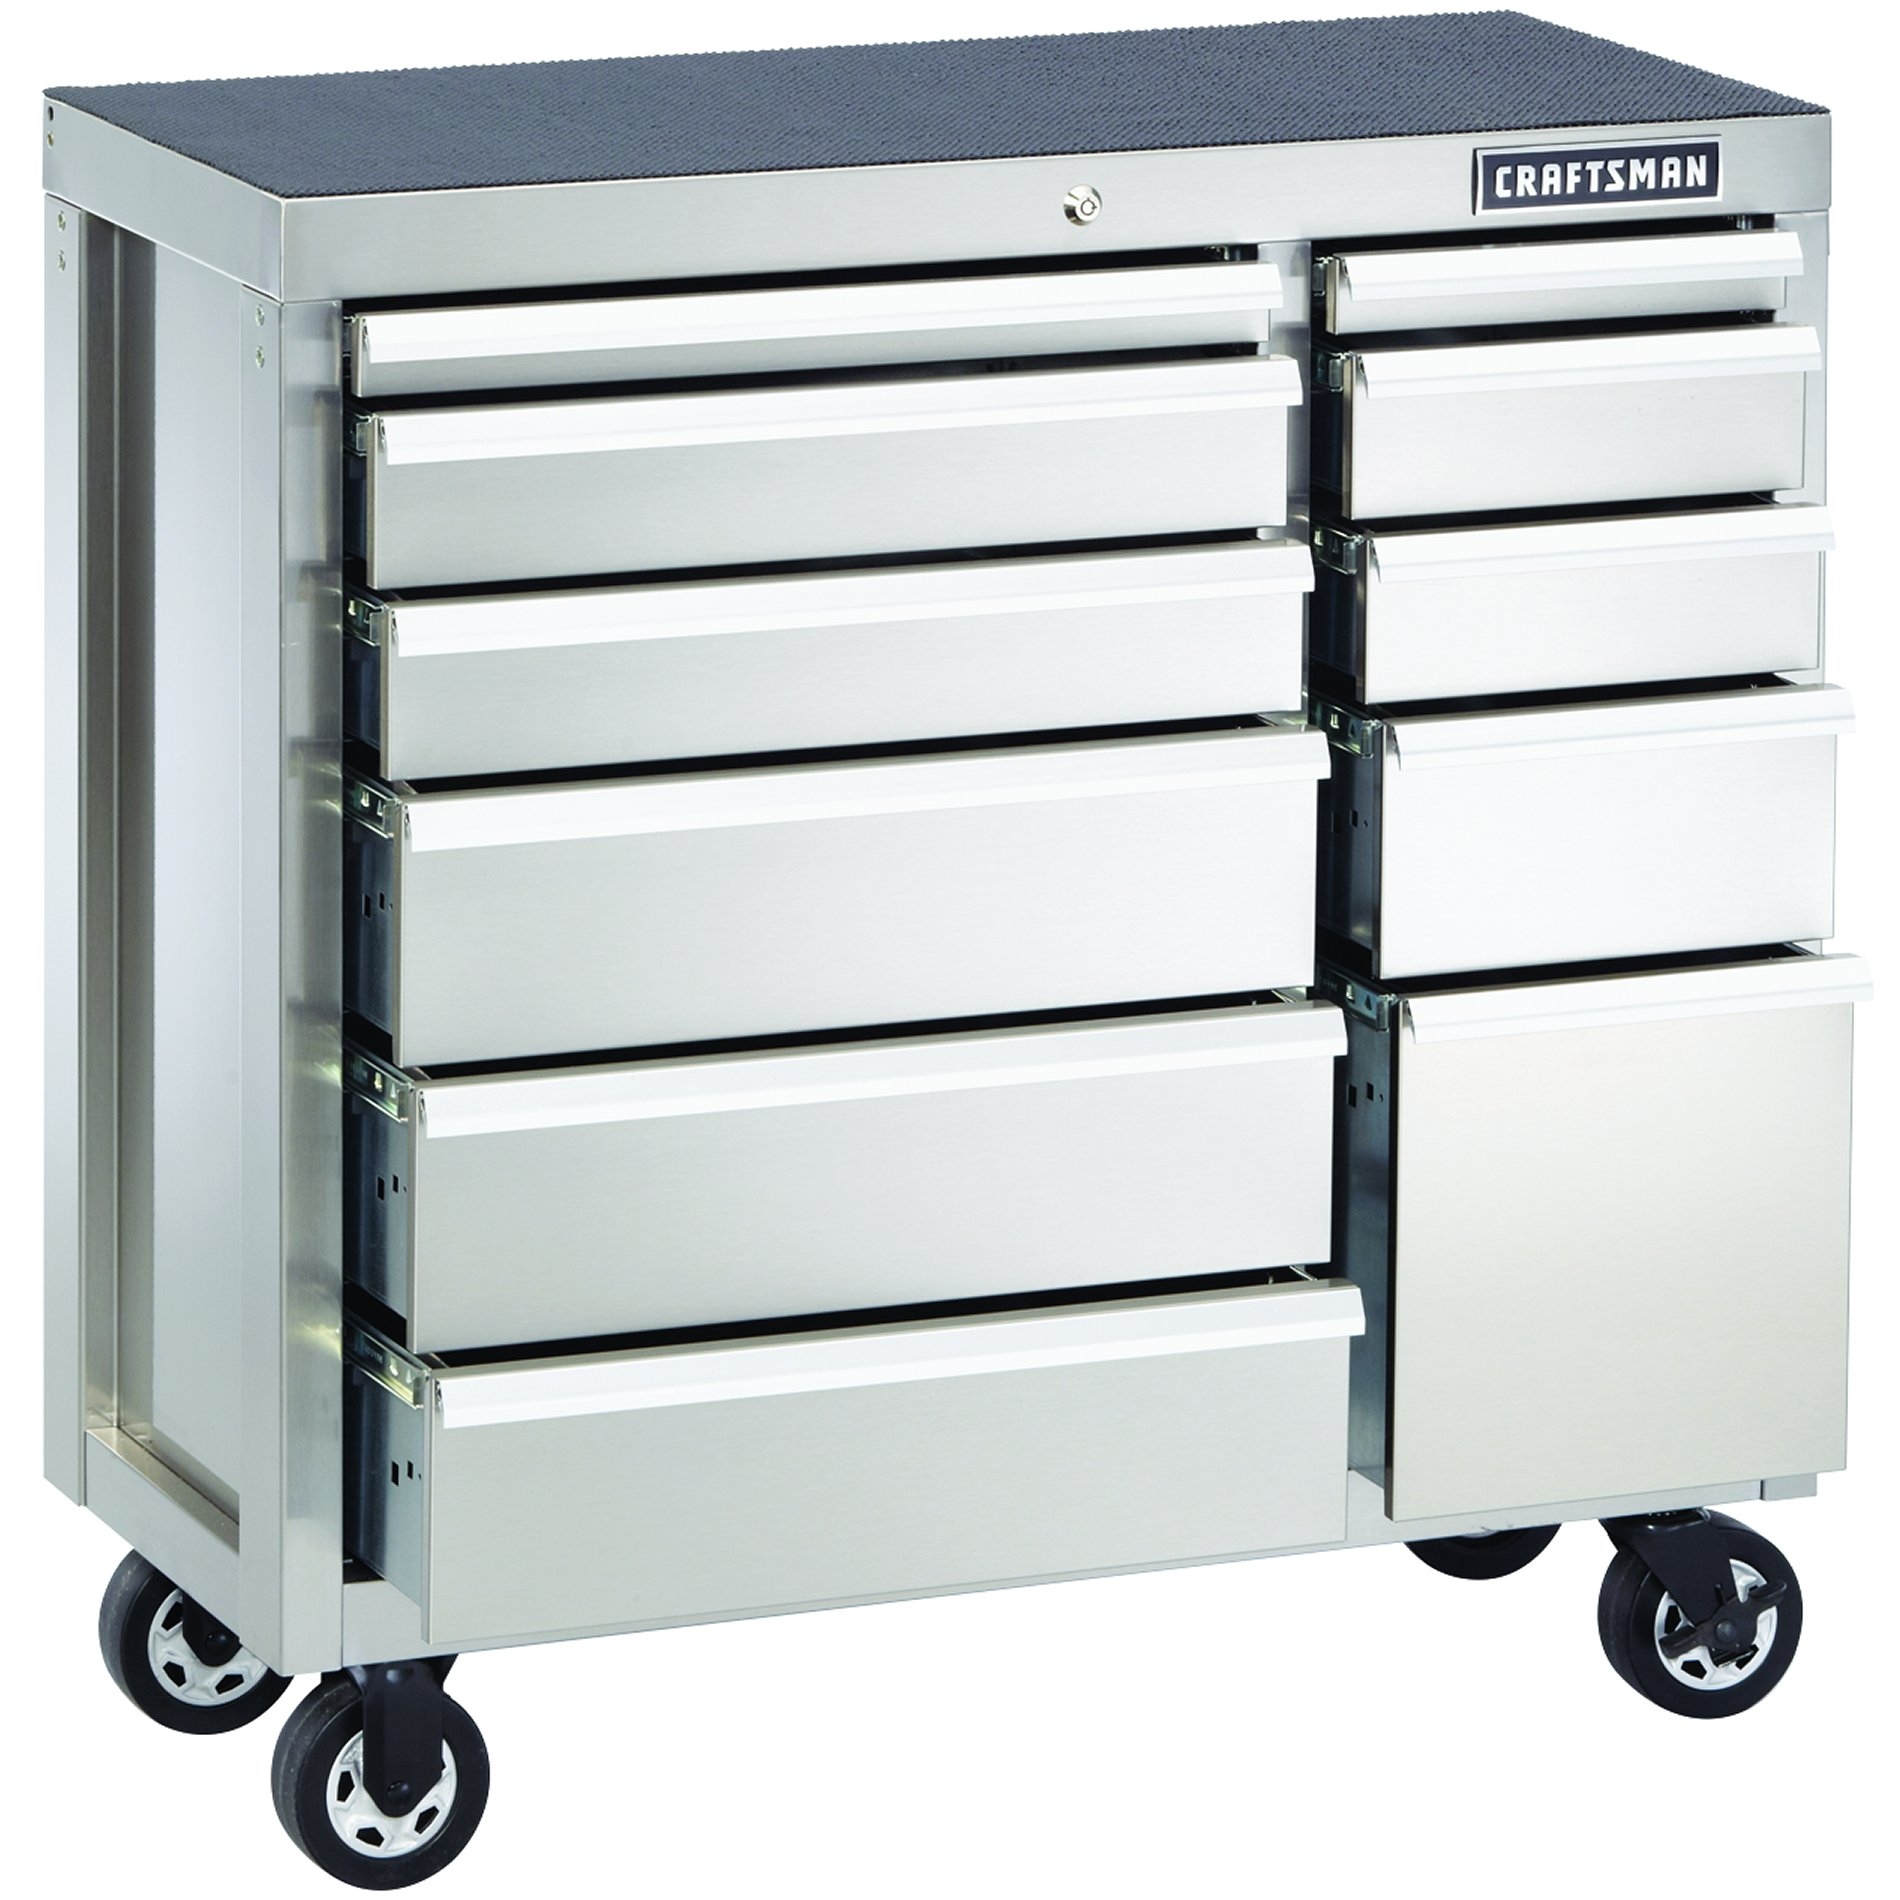 Stainless steel carts with drawers 8